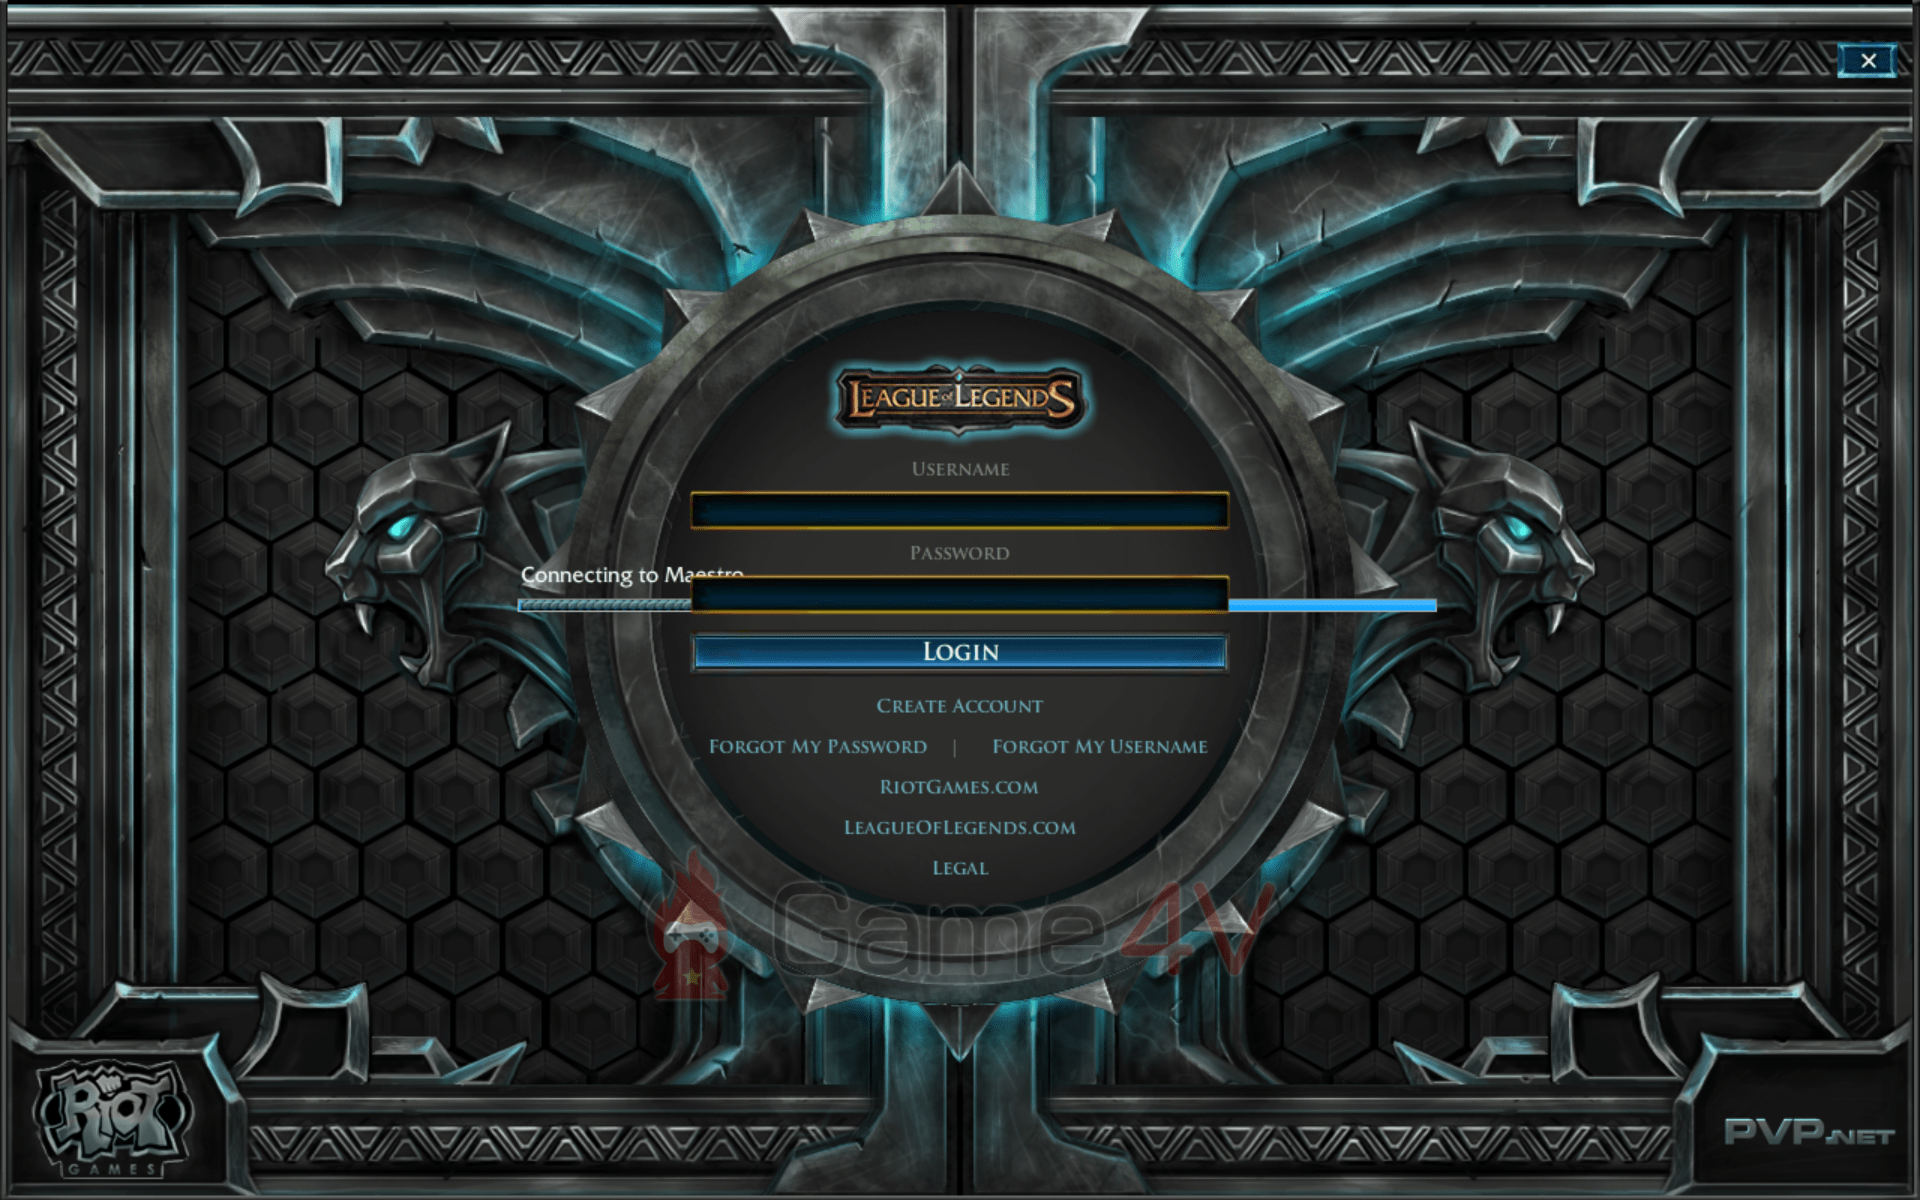 If you don't update and go directly to the game from this client, you will enter the login screen "super rare".